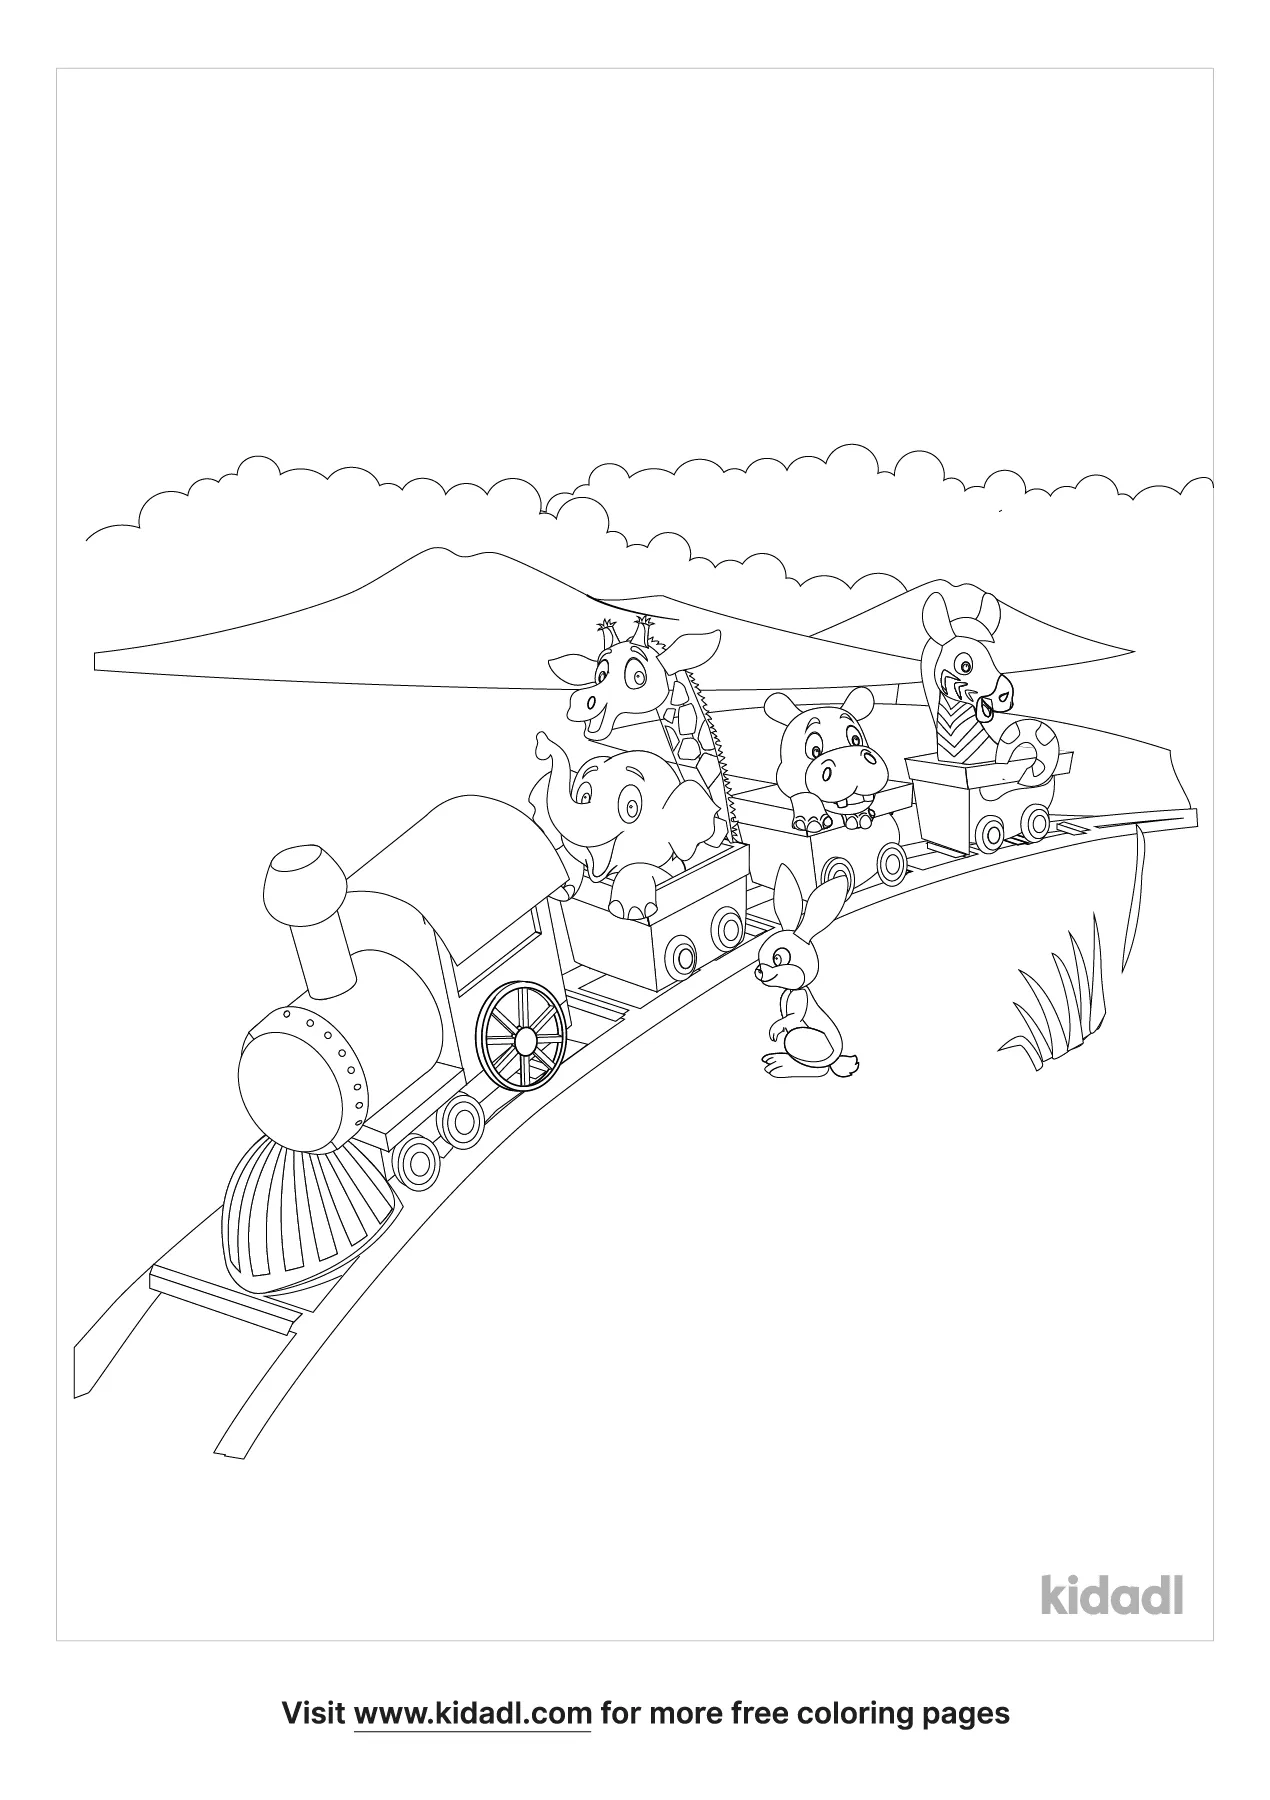 Train Going Around A Mountain Coloring Page